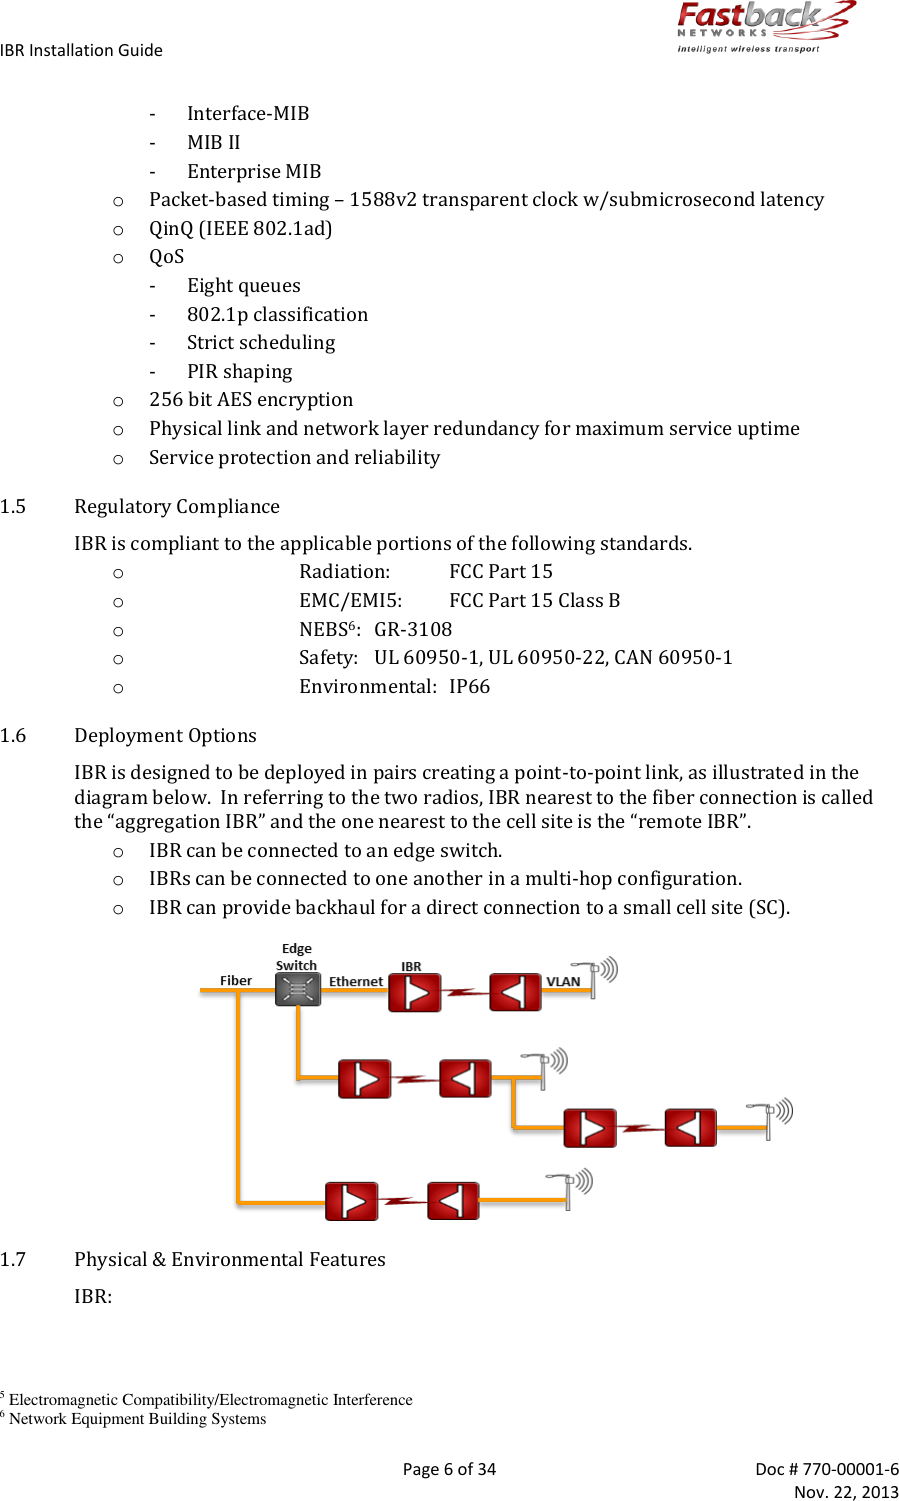 IBR Installation Guide        Page 6 of 34  Doc # 770-00001-6     Nov. 22, 2013   - Interface-MIB - MIB II - Enterprise MIB o Packet-based timing – 1588v2 transparent clock w/submicrosecond latency o QinQ (IEEE 802.1ad) o QoS - Eight queues - 802.1p classification - Strict scheduling - PIR shaping o 256 bit AES encryption o Physical link and network layer redundancy for maximum service uptime o Service protection and reliability 1.5 Regulatory Compliance IBR is compliant to the applicable portions of the following standards. o Radiation:  FCC Part 15 o EMC/EMI5:  FCC Part 15 Class B o NEBS6:  GR-3108 o Safety:  UL 60950-1, UL 60950-22, CAN 60950-1 o Environmental:  IP66 1.6 Deployment Options IBR is designed to be deployed in pairs creating a point-to-point link, as illustrated in the diagram below.  In referring to the two radios, IBR nearest to the fiber connection is called the “aggregation IBR” and the one nearest to the cell site is the “remote IBR”. o IBR can be connected to an edge switch. o IBRs can be connected to one another in a multi-hop configuration. o IBR can provide backhaul for a direct connection to a small cell site (SC).                             1.7 Physical &amp; Environmental Features IBR:  5 Electromagnetic Compatibility/Electromagnetic Interference 6 Network Equipment Building Systems 